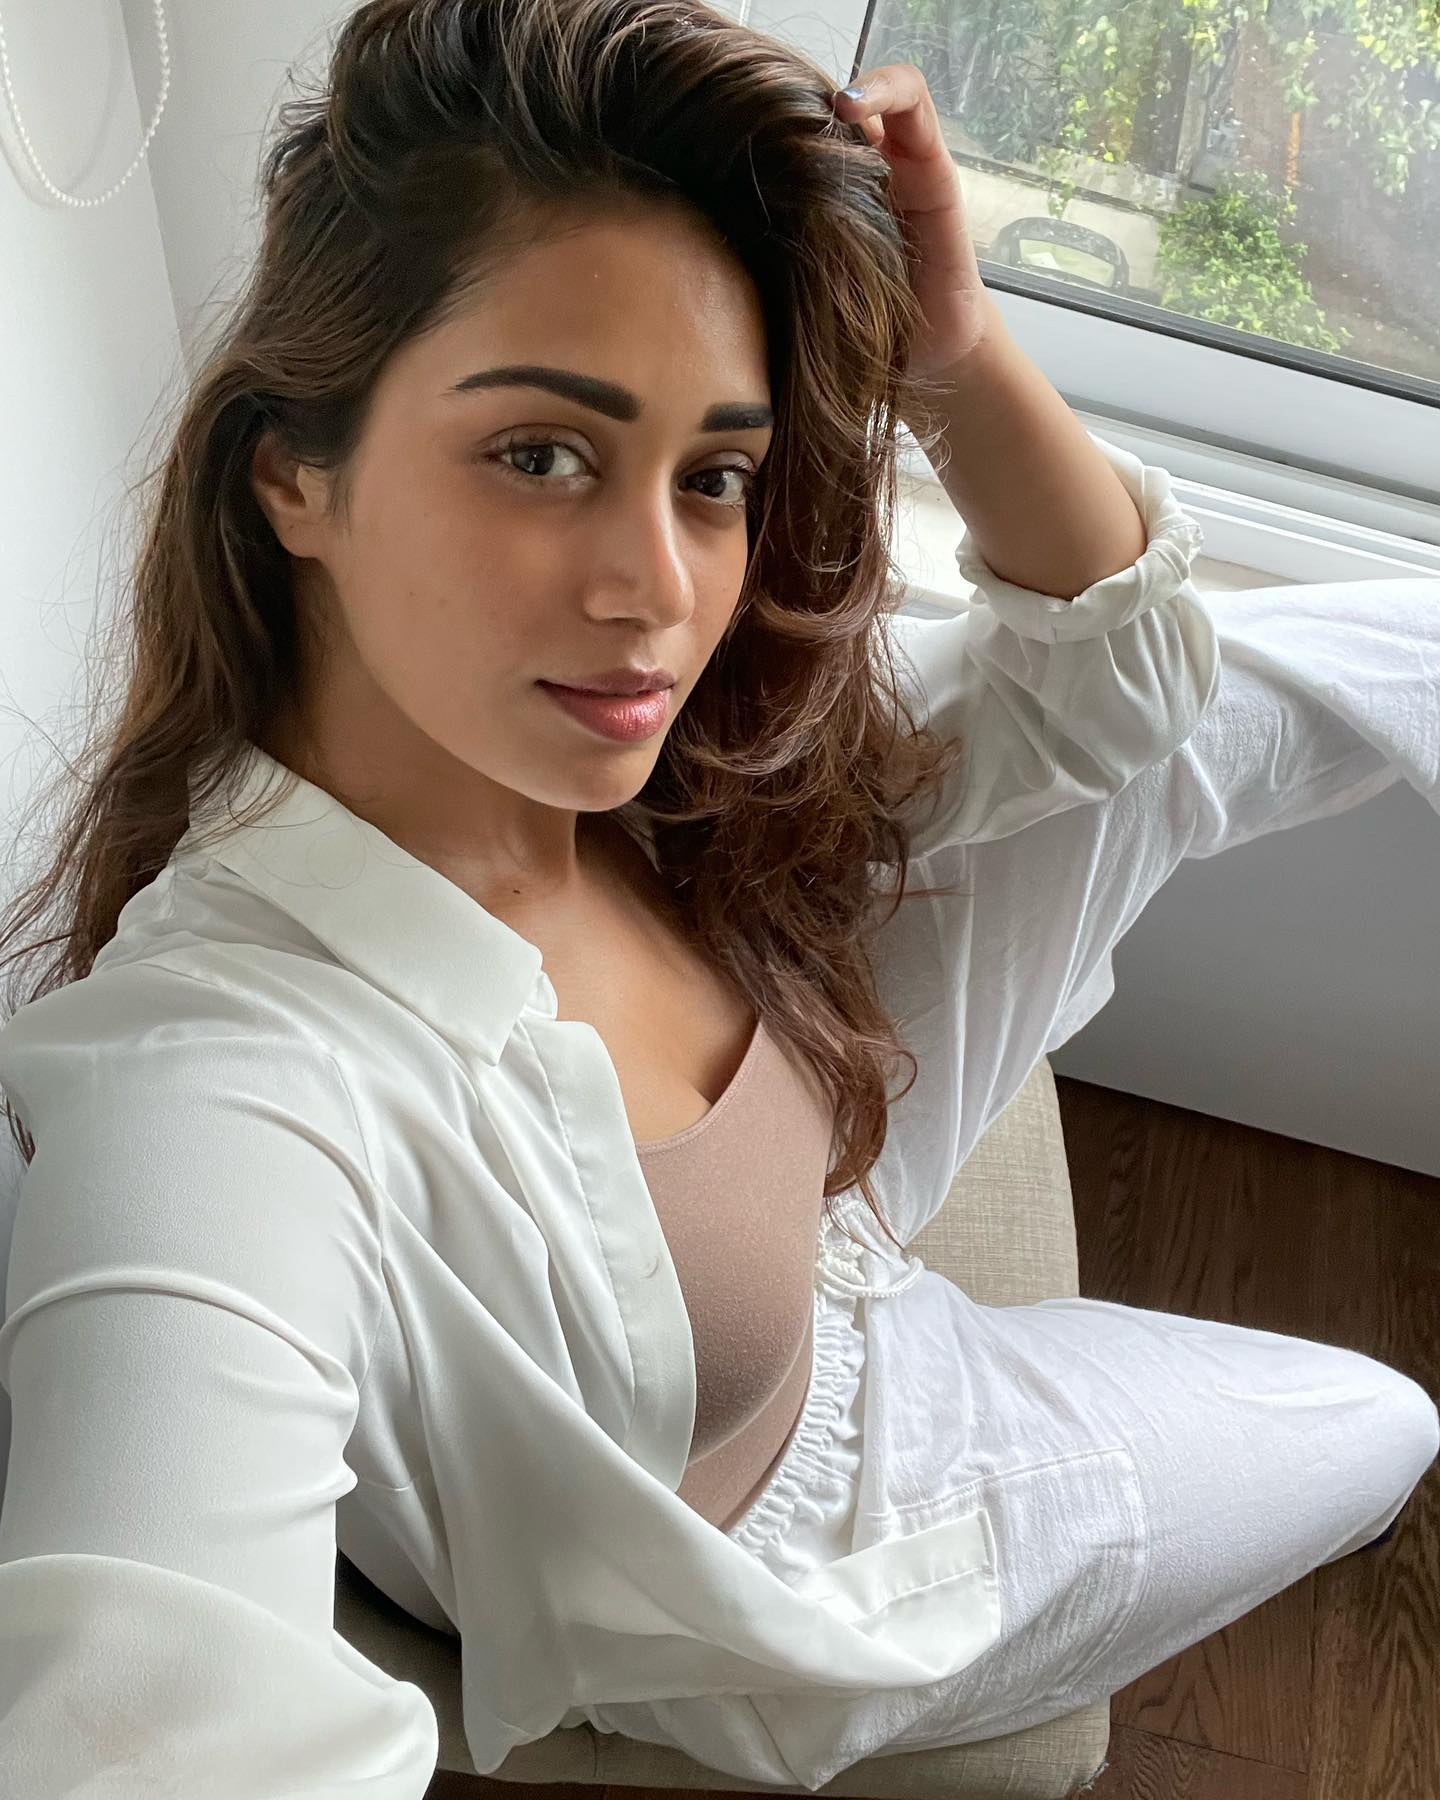 actress nivetha pethuraj hot photos in inners in public place getting viral